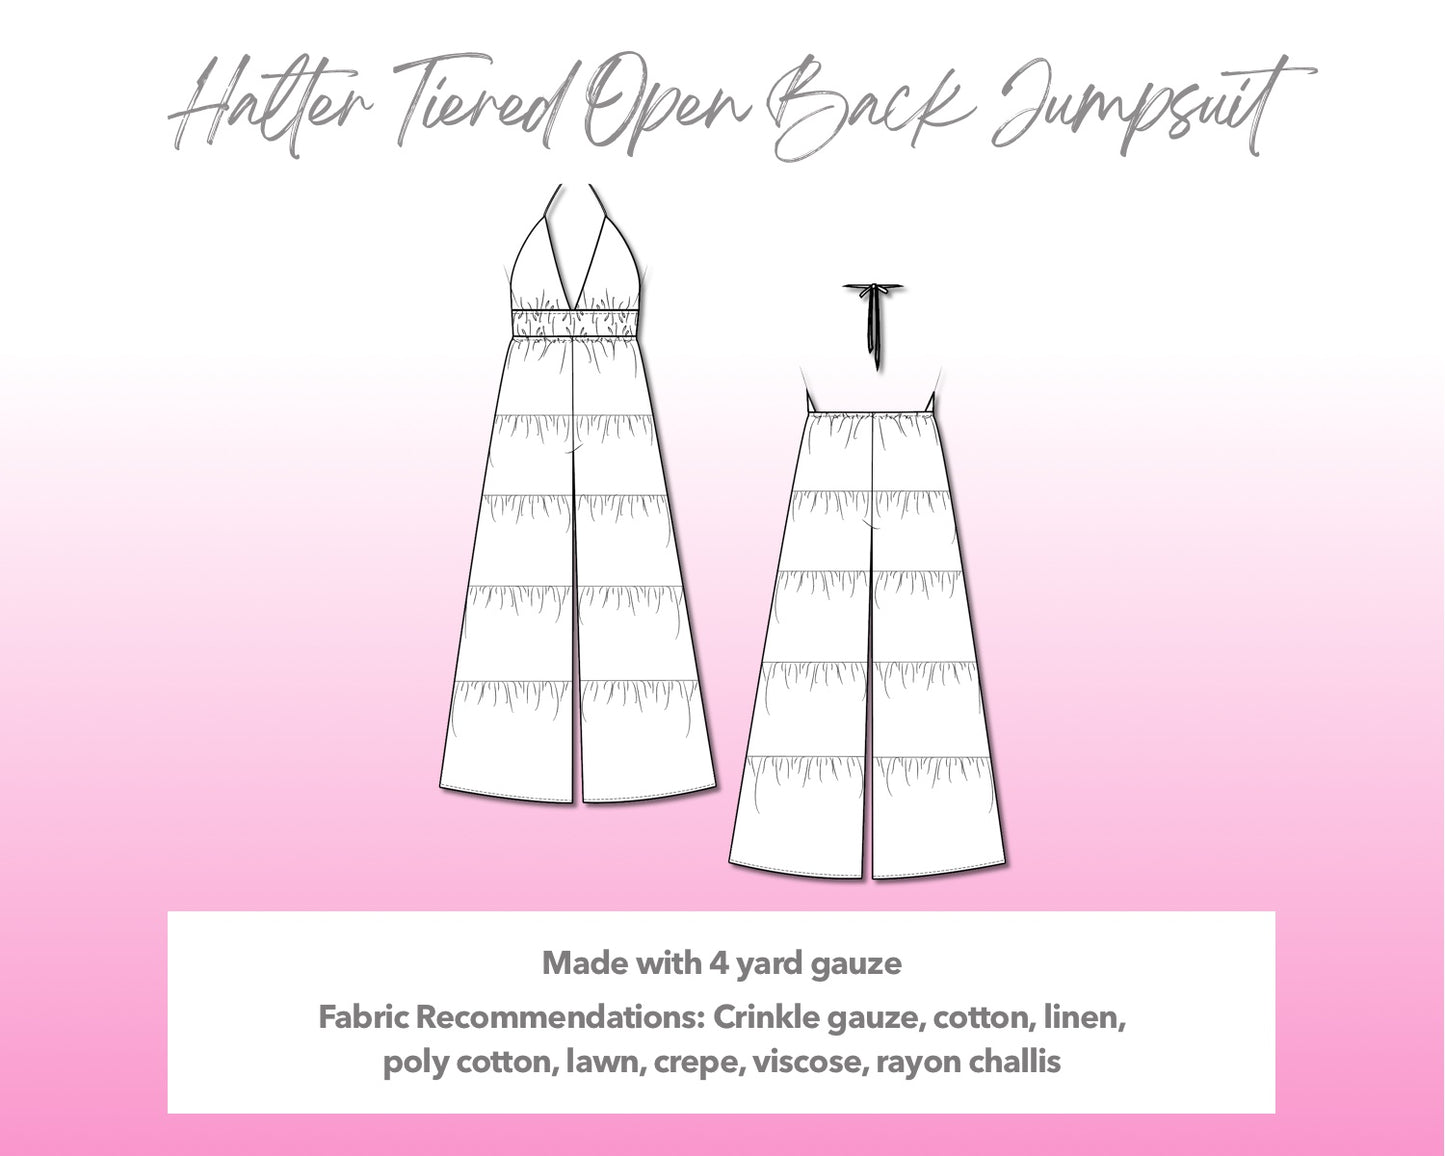 Illustration and detailed description for Halter Tiered Open Back Jumpsuit sewing pattern.